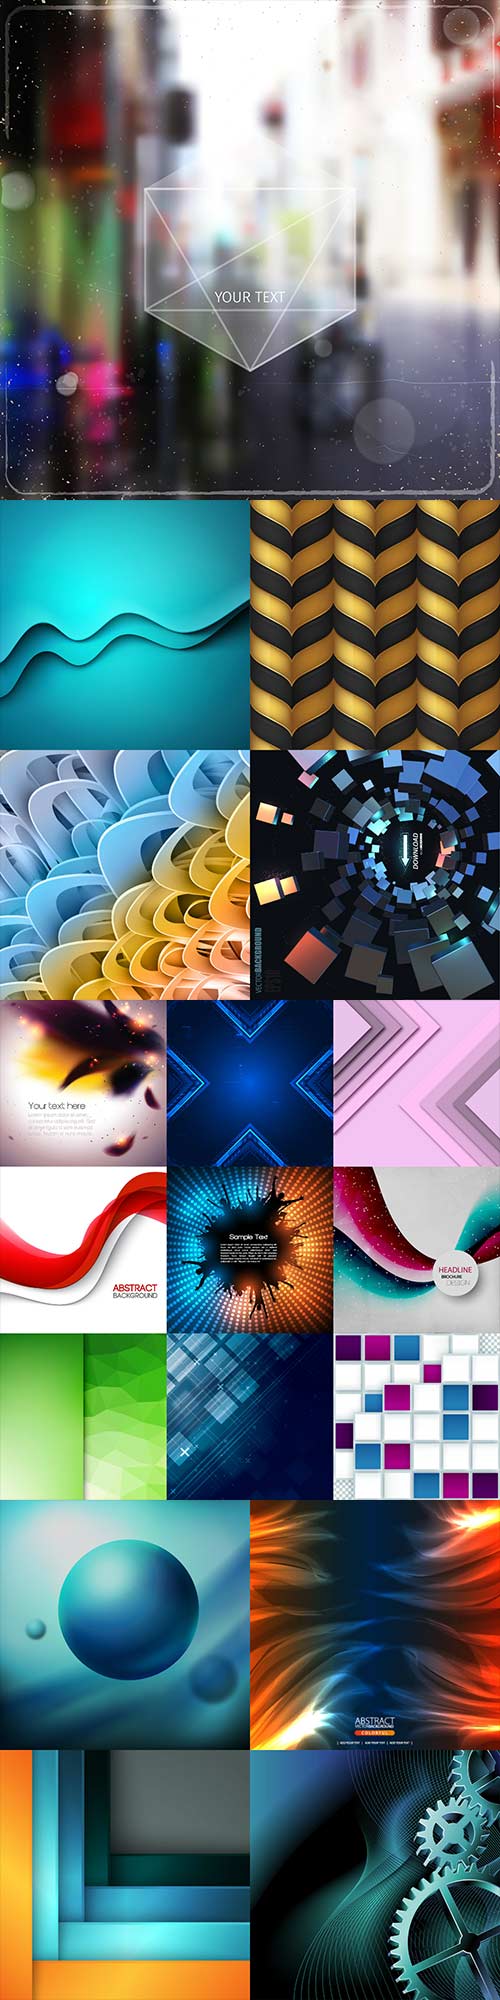 Bright colorful abstract backgrounds vector - 77